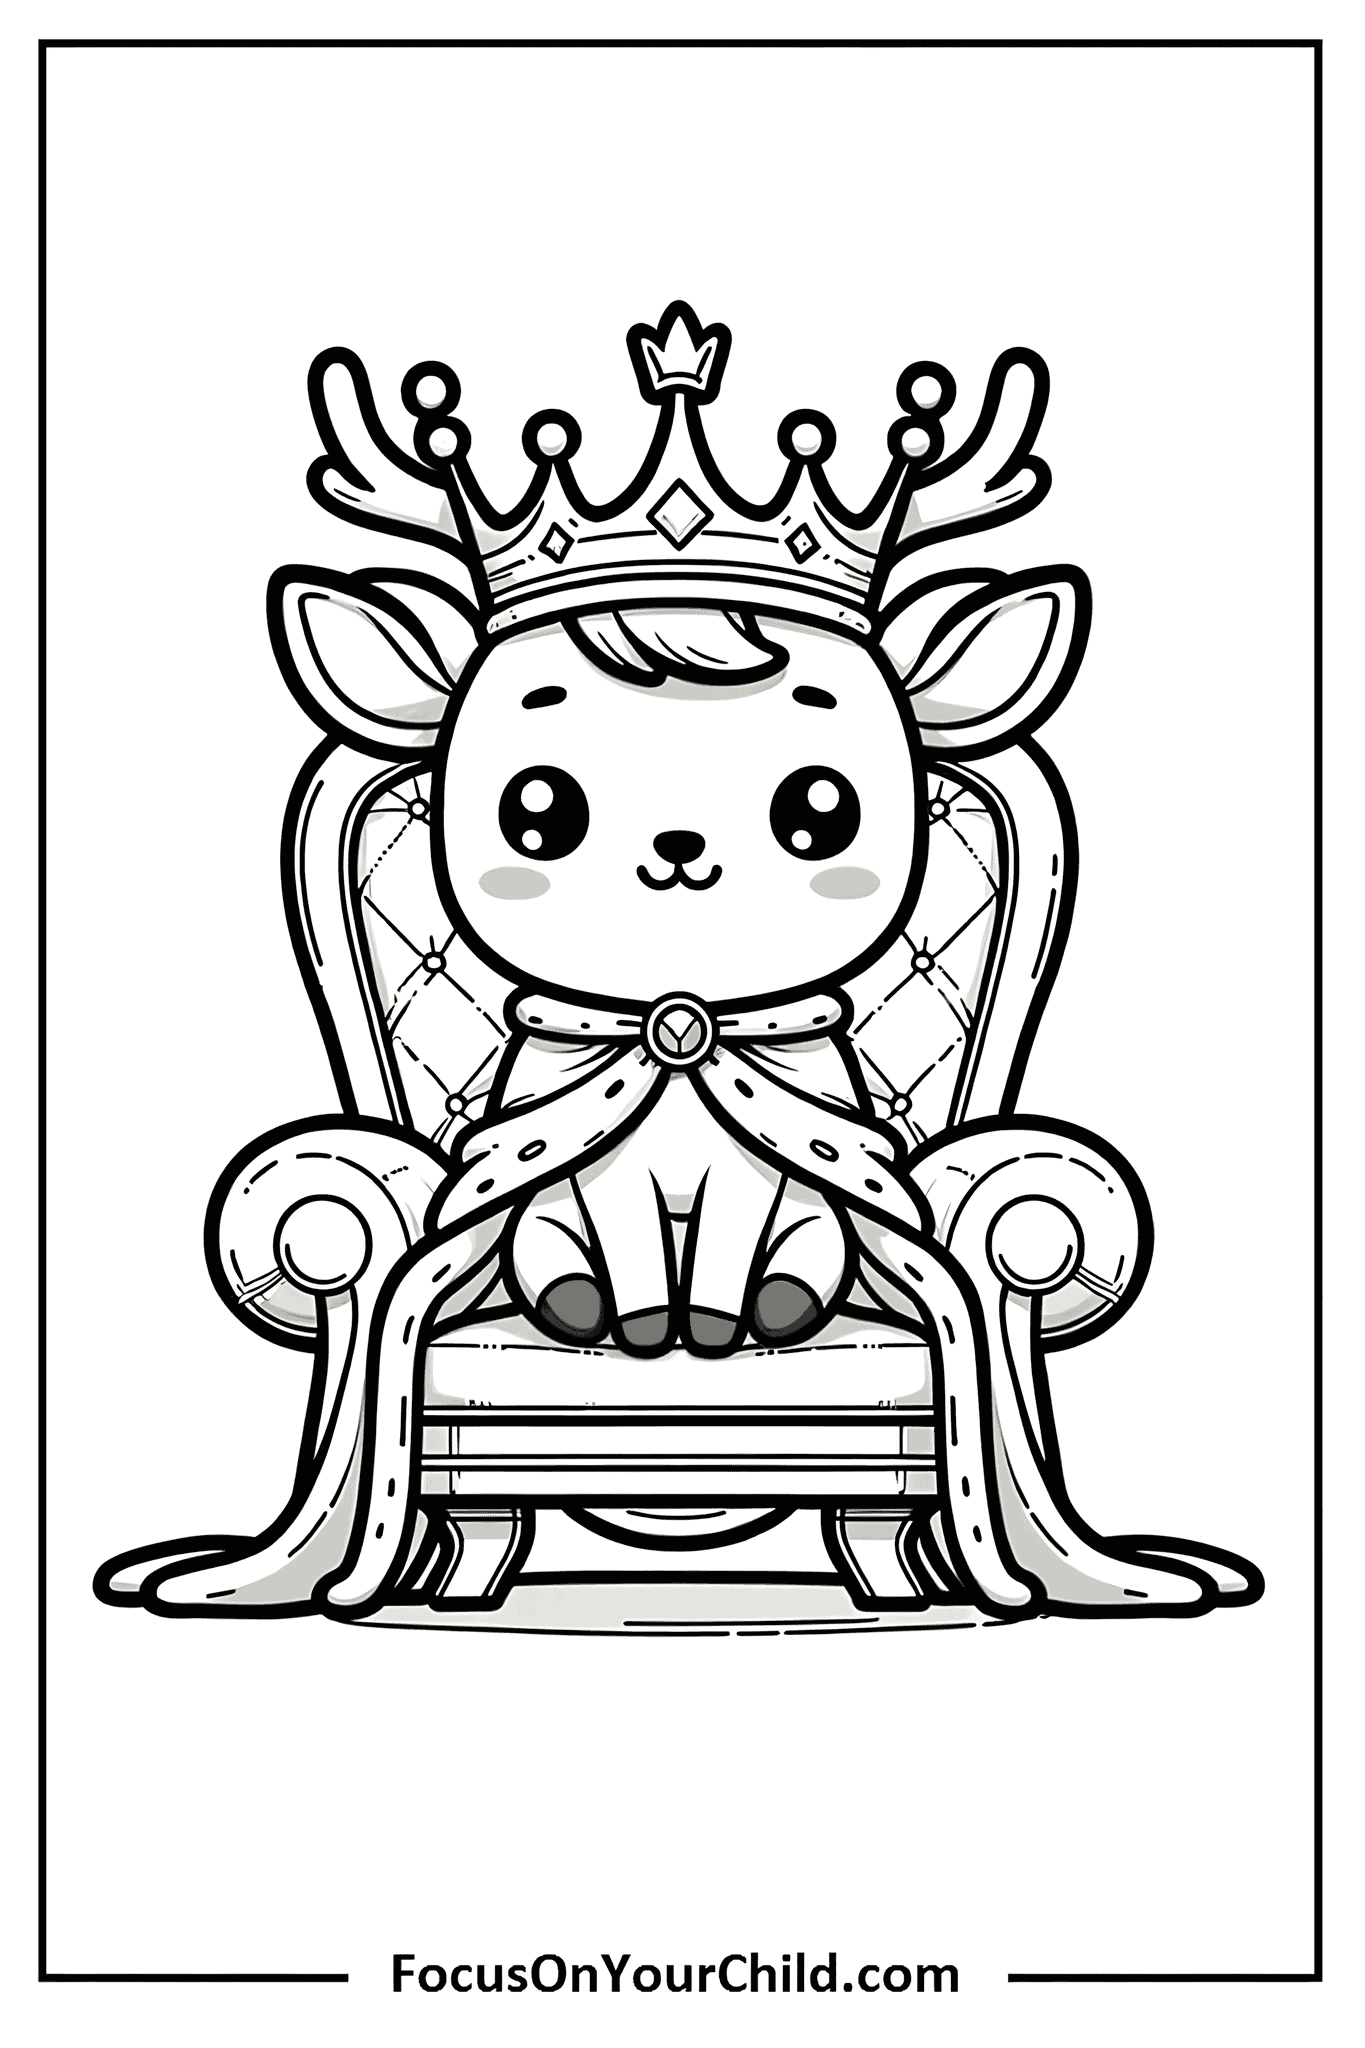 Whimsical deer fawn on a royal throne, perfect for childrens coloring activities.